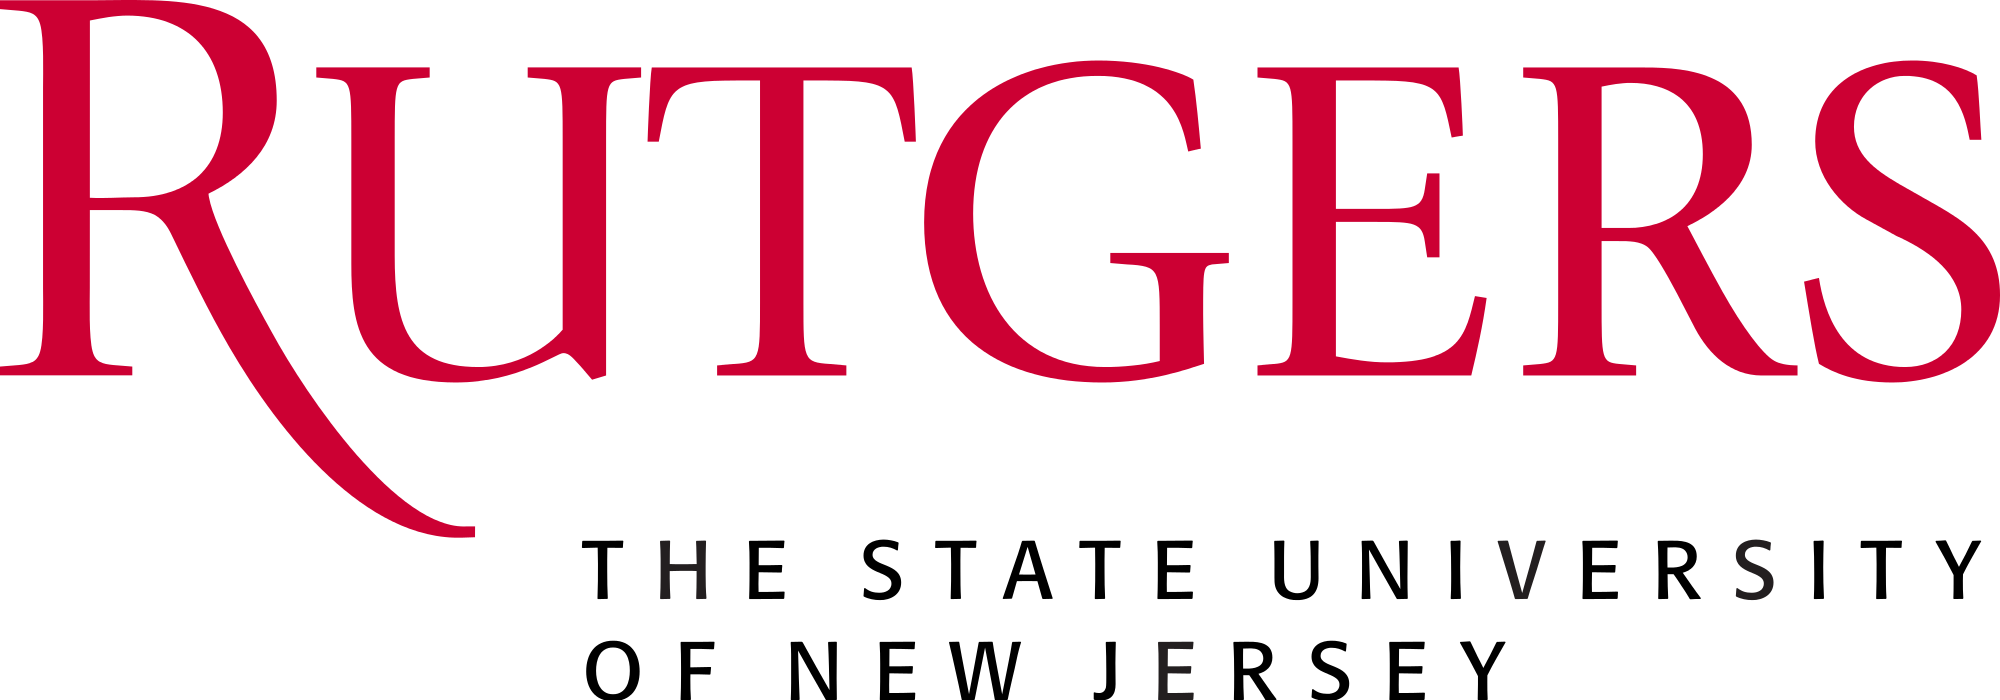 Rutgers_University_with_the_state_university_logo.svg.png